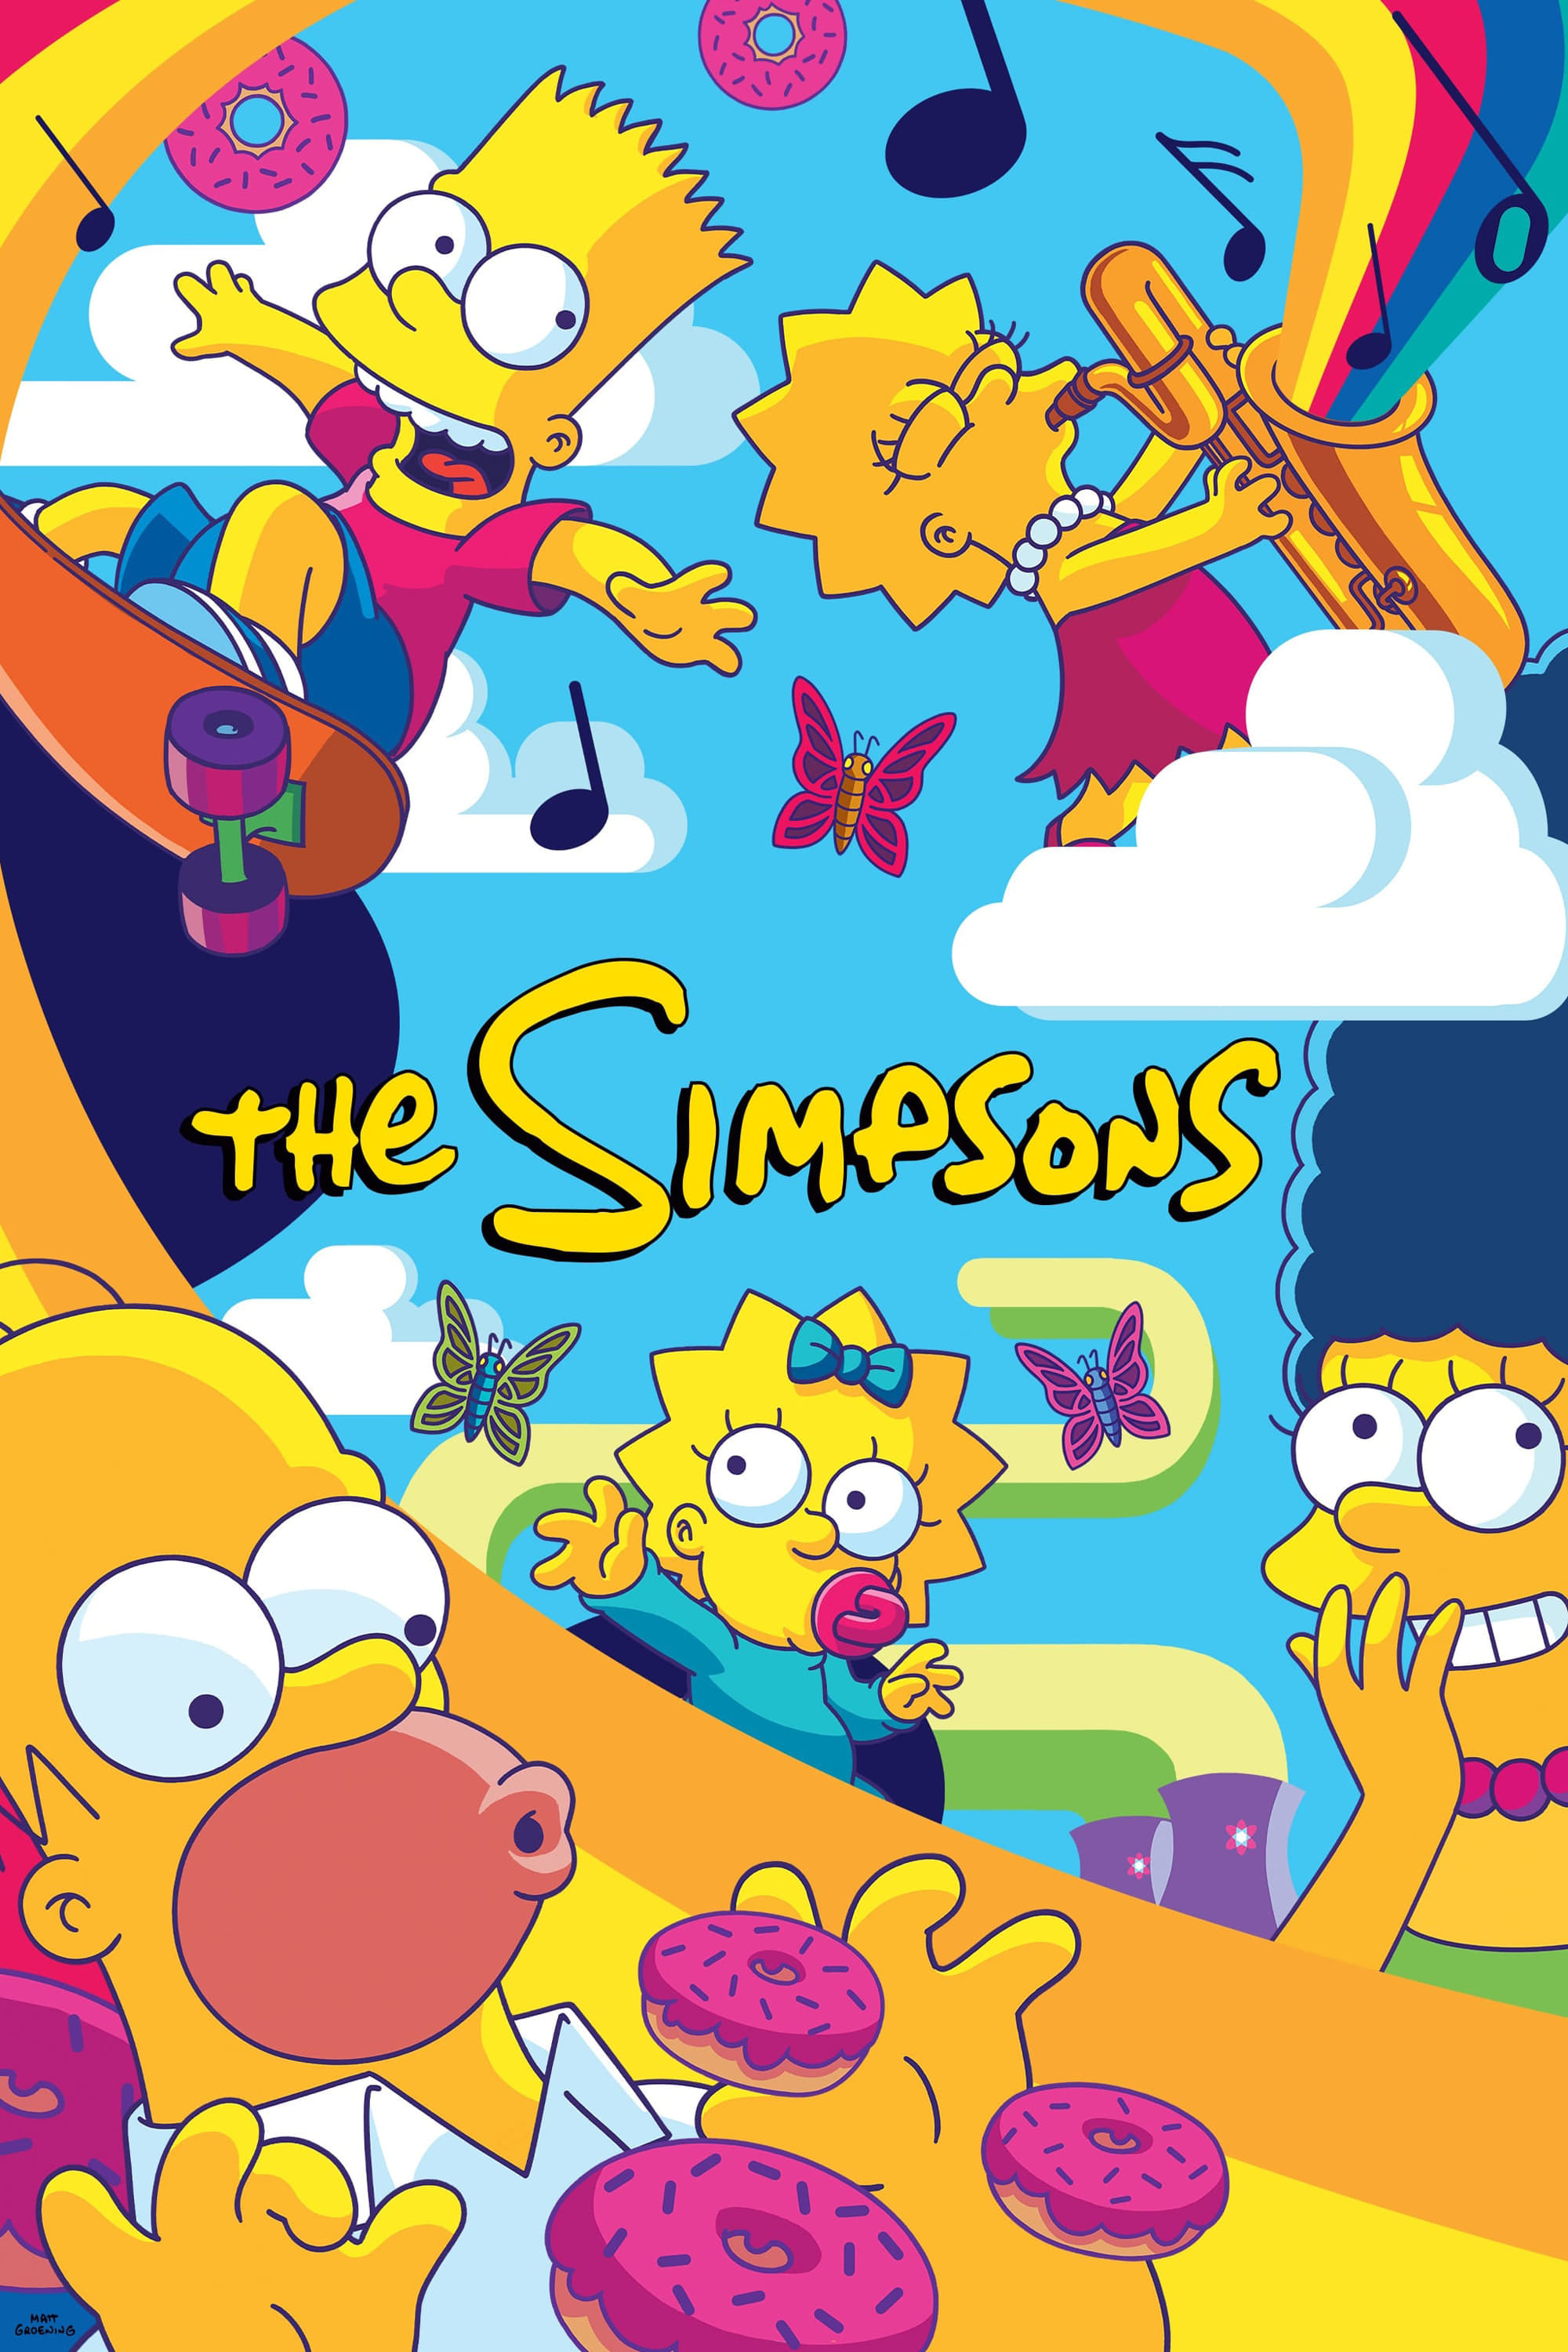 The Simpsons (S02E05)